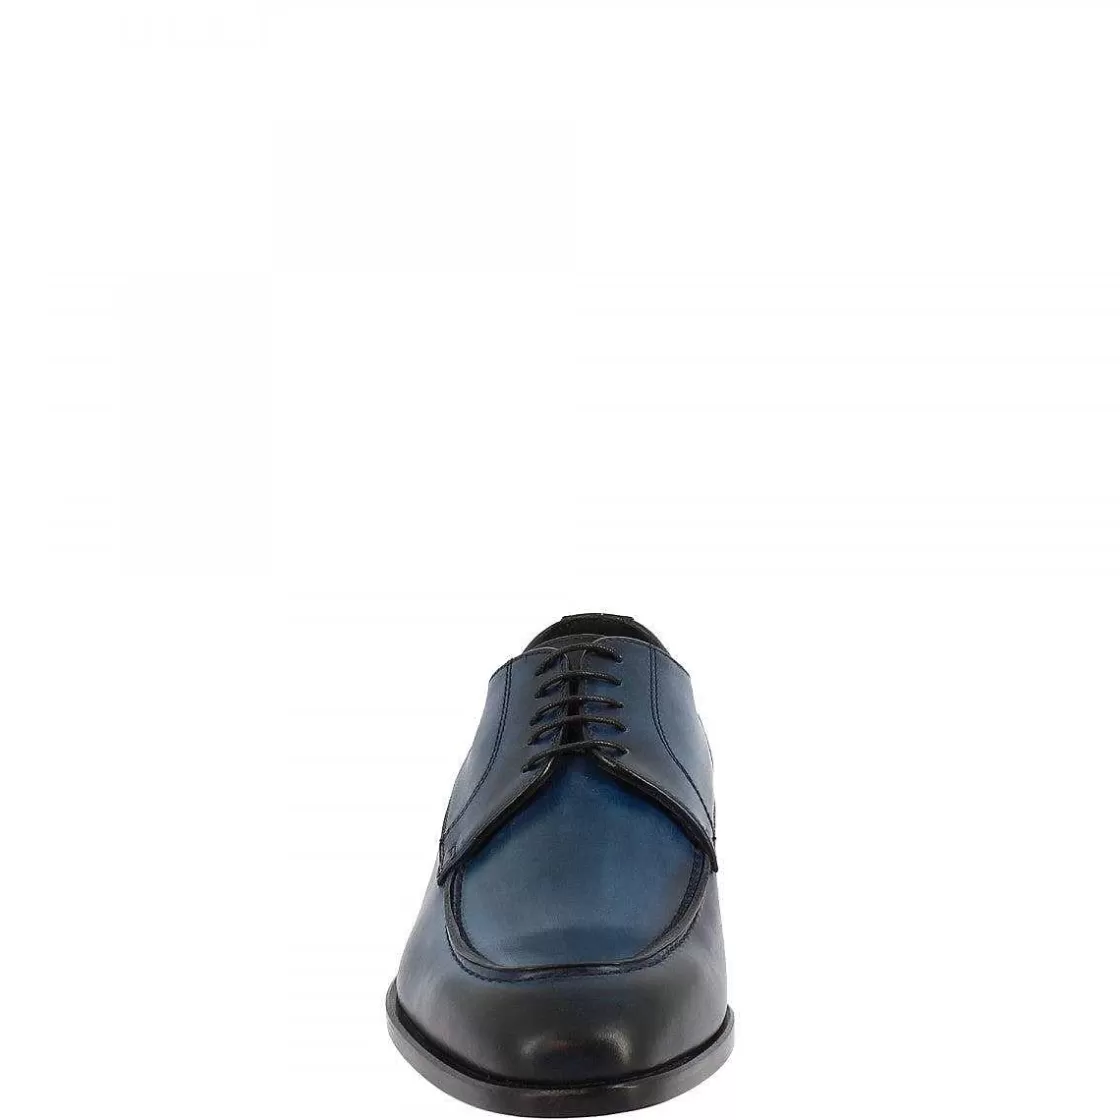 Leonardo Men'S Handmade Lace-Up Shoes In Blue Calf Leather Outlet